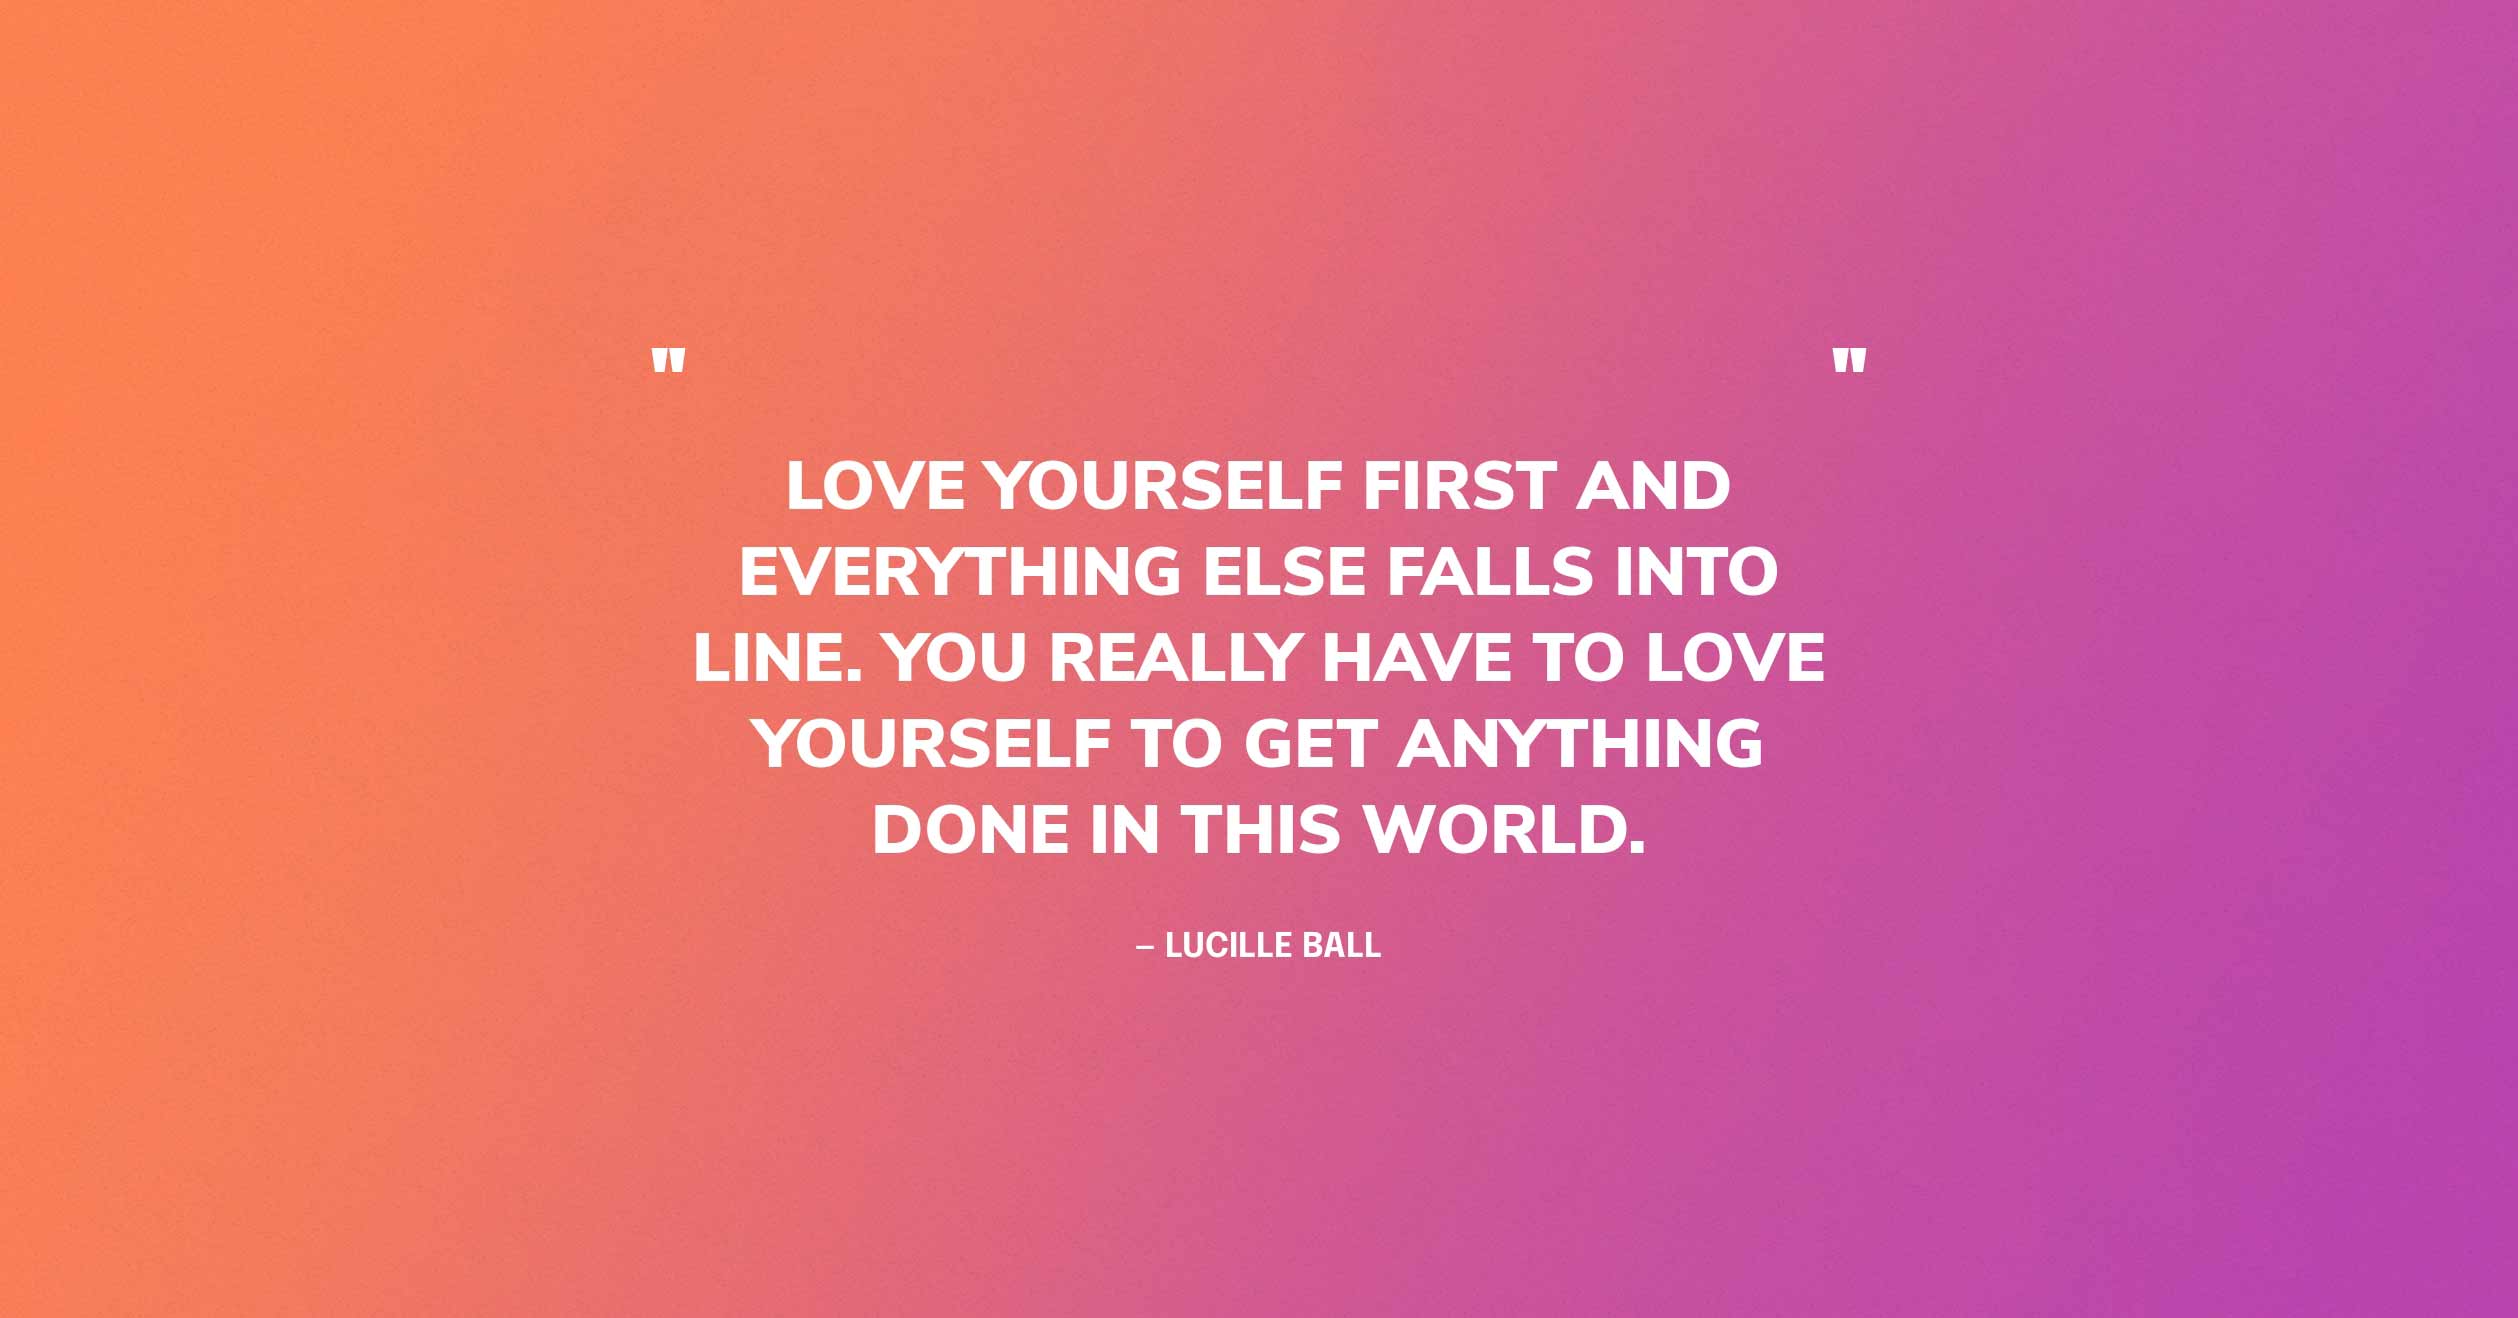 Self Love Quote Graphic: Love yourself first and everything else falls into line. You really have to love yourself to get anything done in this world. — Lucille Ball